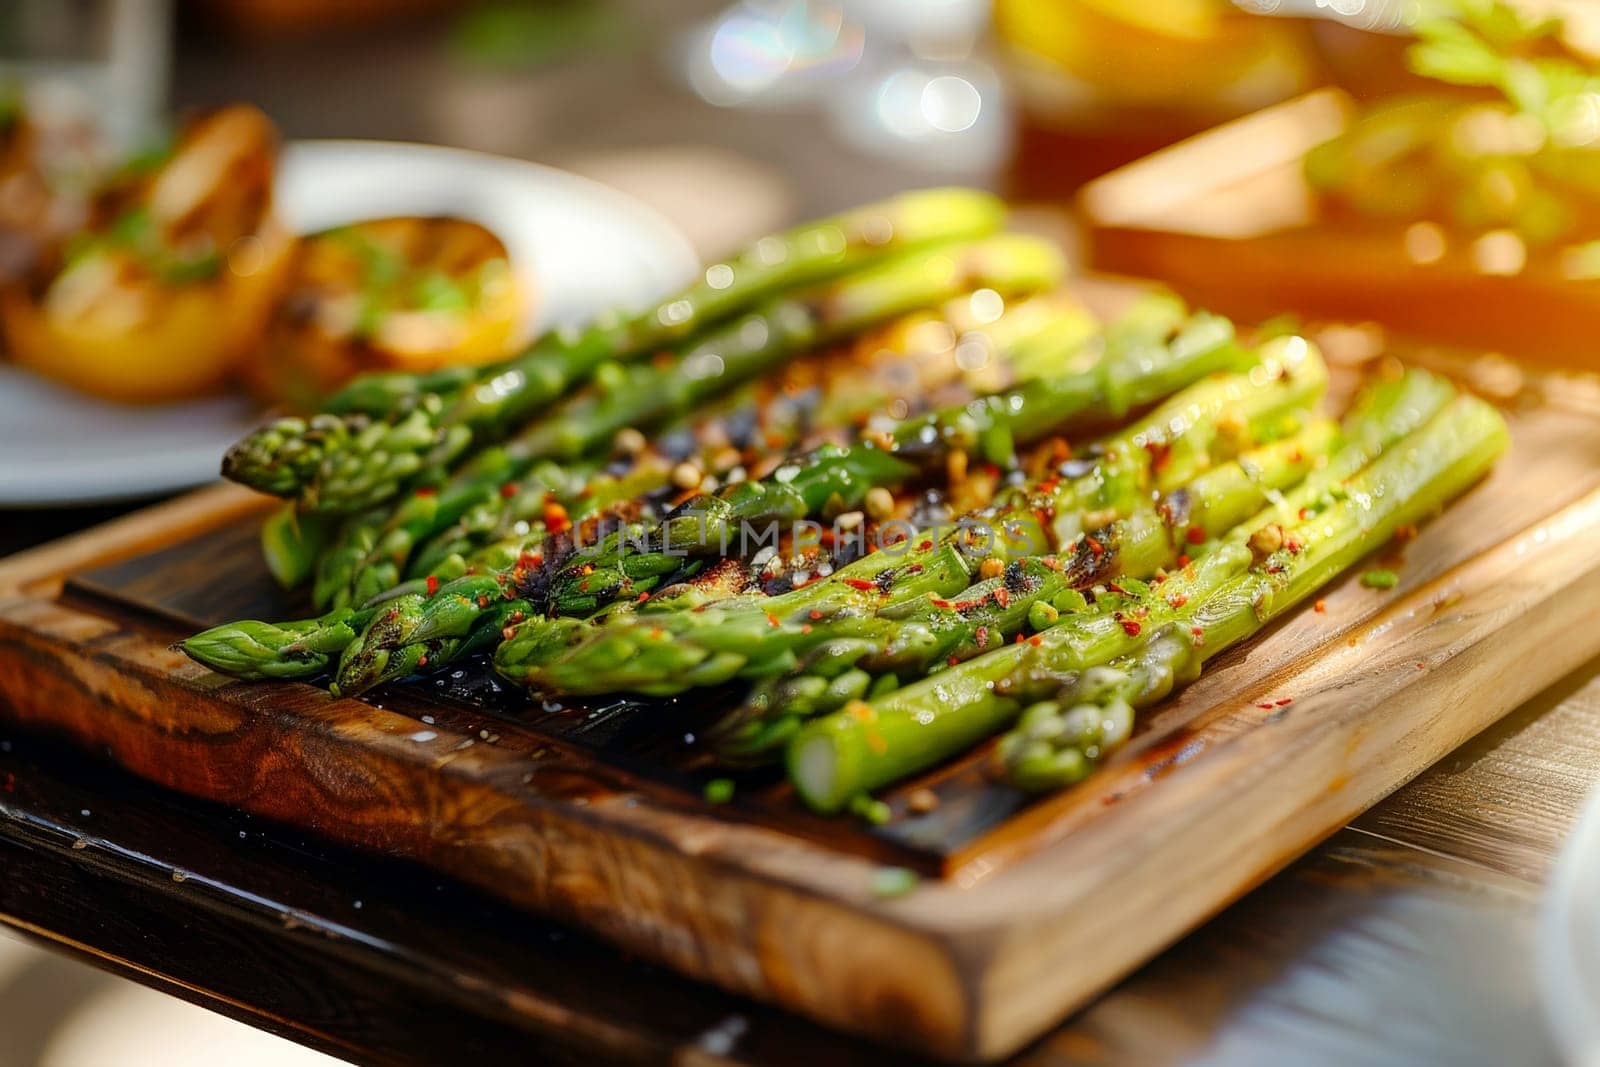 A plate of asparagus is on a wooden cutting board.